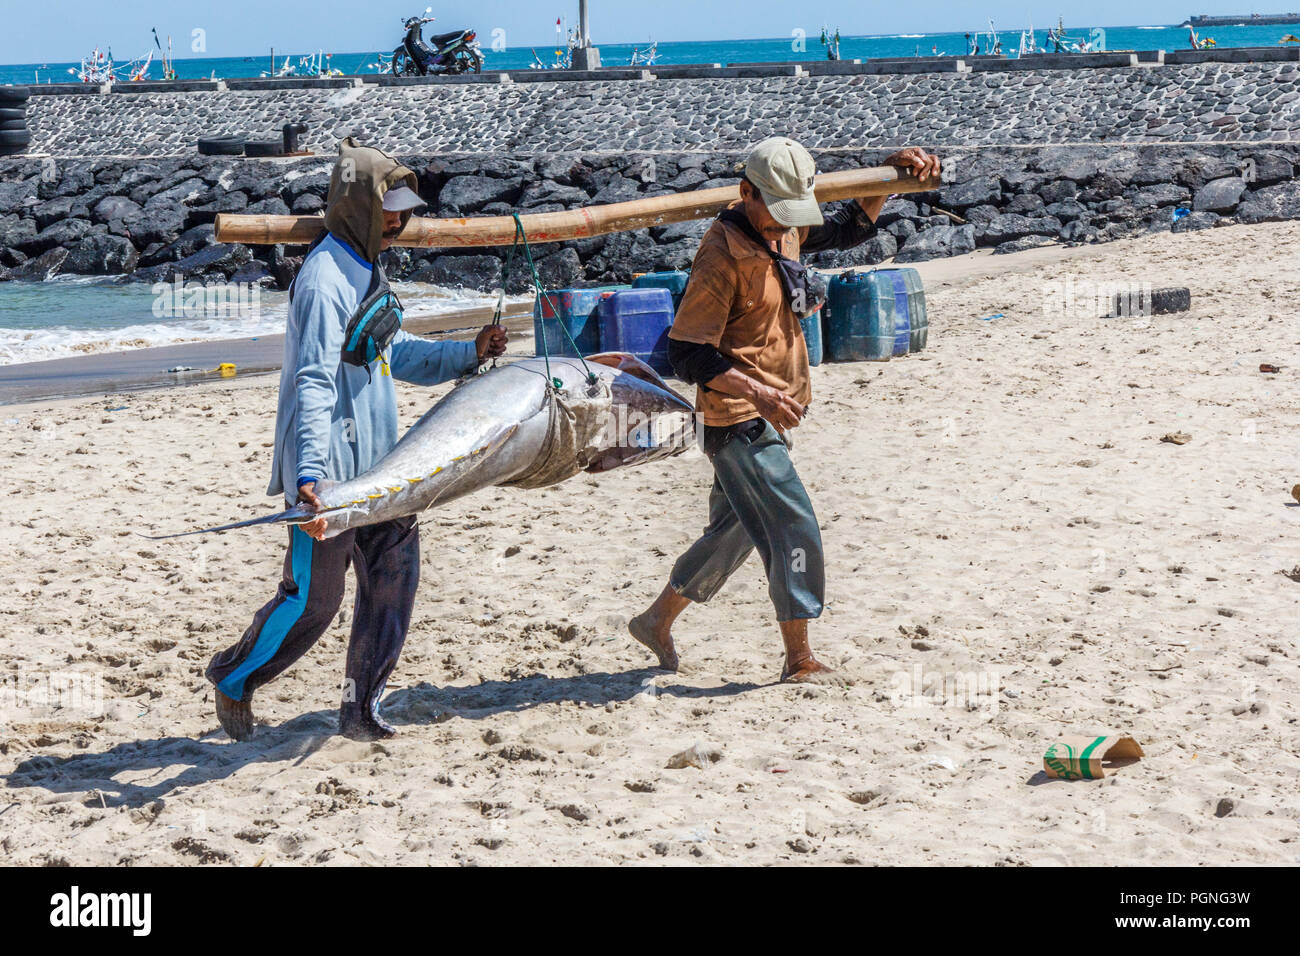 Bali, Indonesia - 30th May 2017: Two men carrying a large tuna fish. Many such fish are landed at Jimbaran beach. Stock Photo